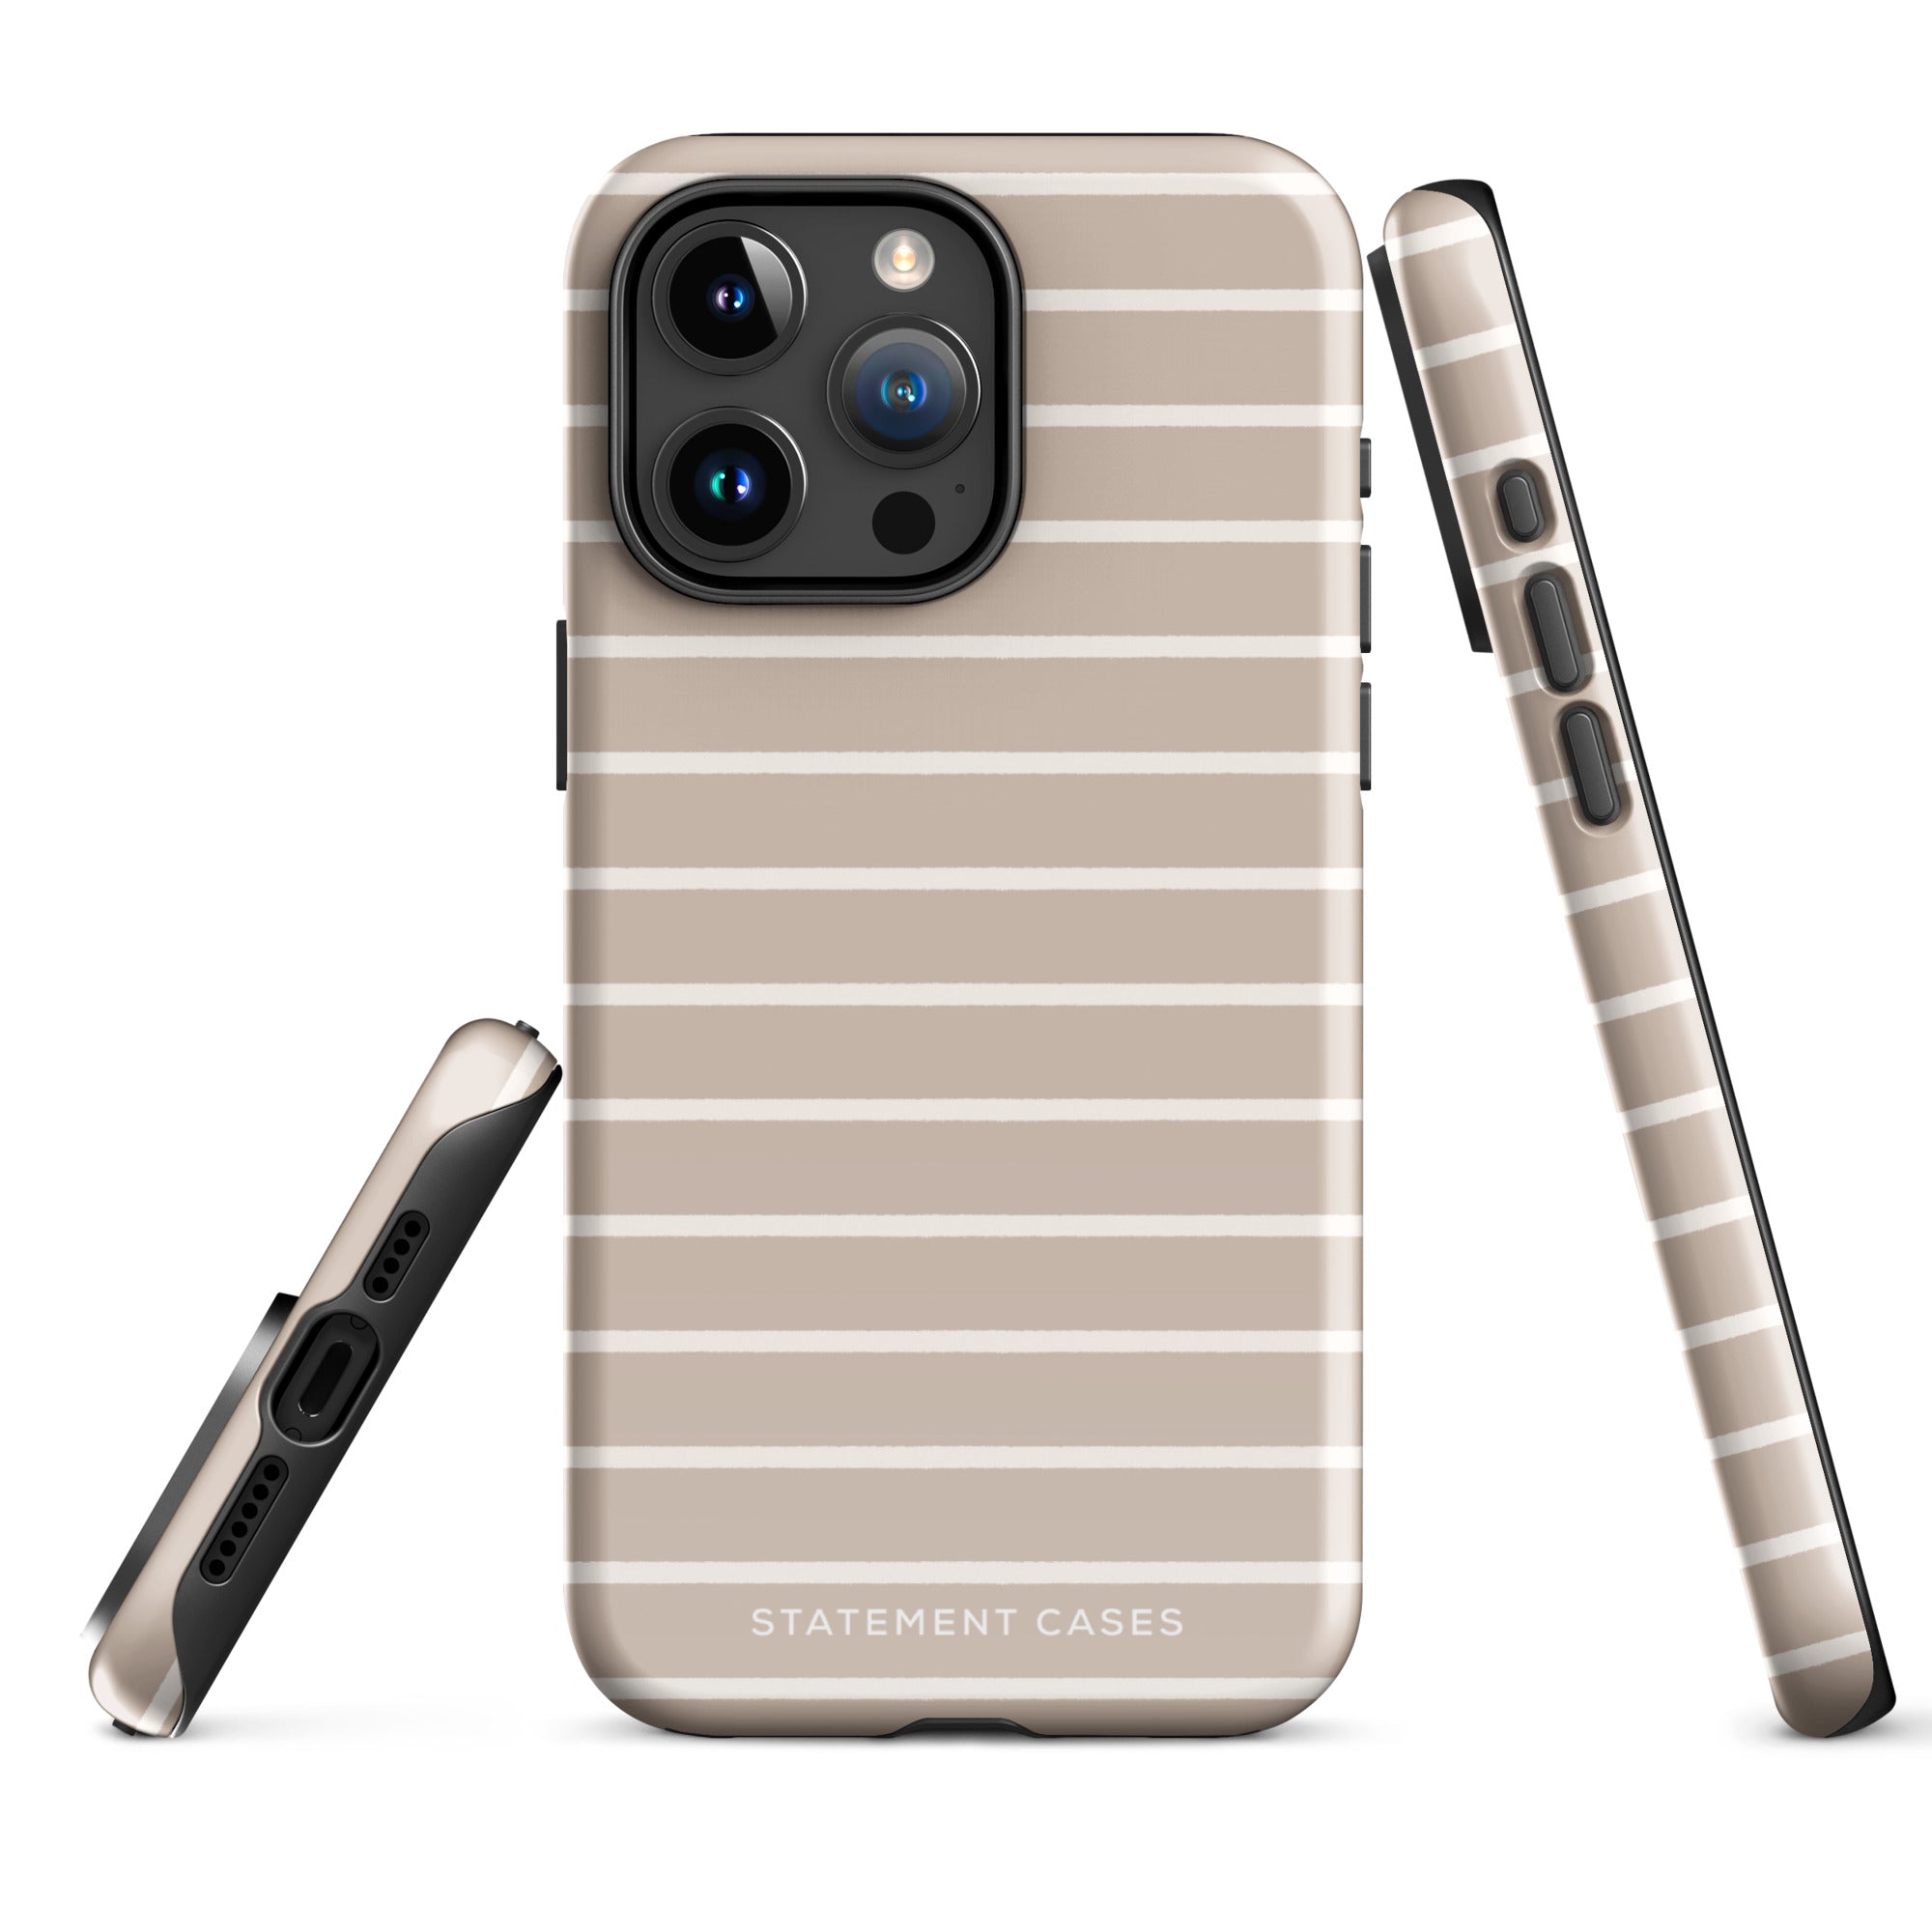 A beige and white striped phone case shown from three angles: front view displaying the camera cutout, side view showing the volume and lock buttons, and bottom view displaying the charging port and speaker openings. This durable dual-layered case, branded "Au Naturale for iPhone" by Statement Cases, ensures top-notch protection.